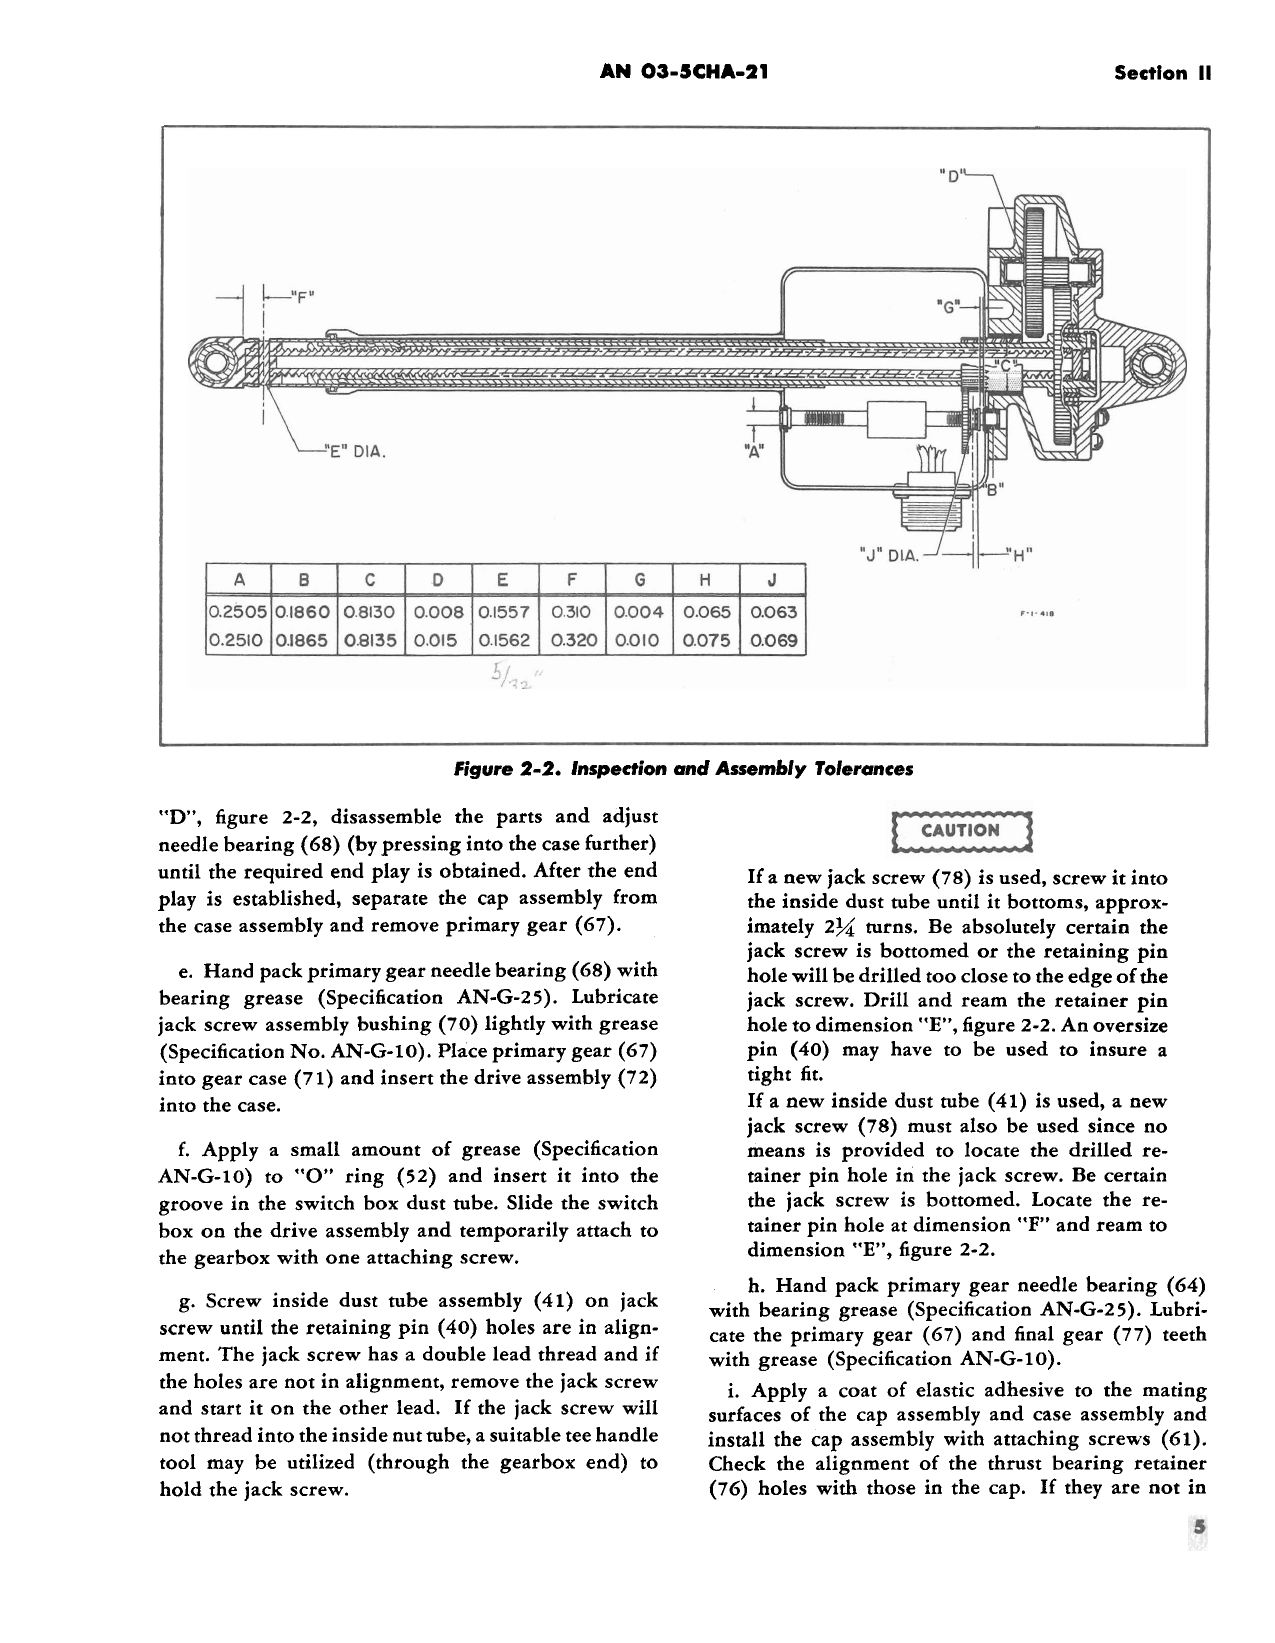 Sample page 7 from AirCorps Library document: Overhaul Instructions for Electro-Mechanical Linear Actuators - Parts 30582 and 31534